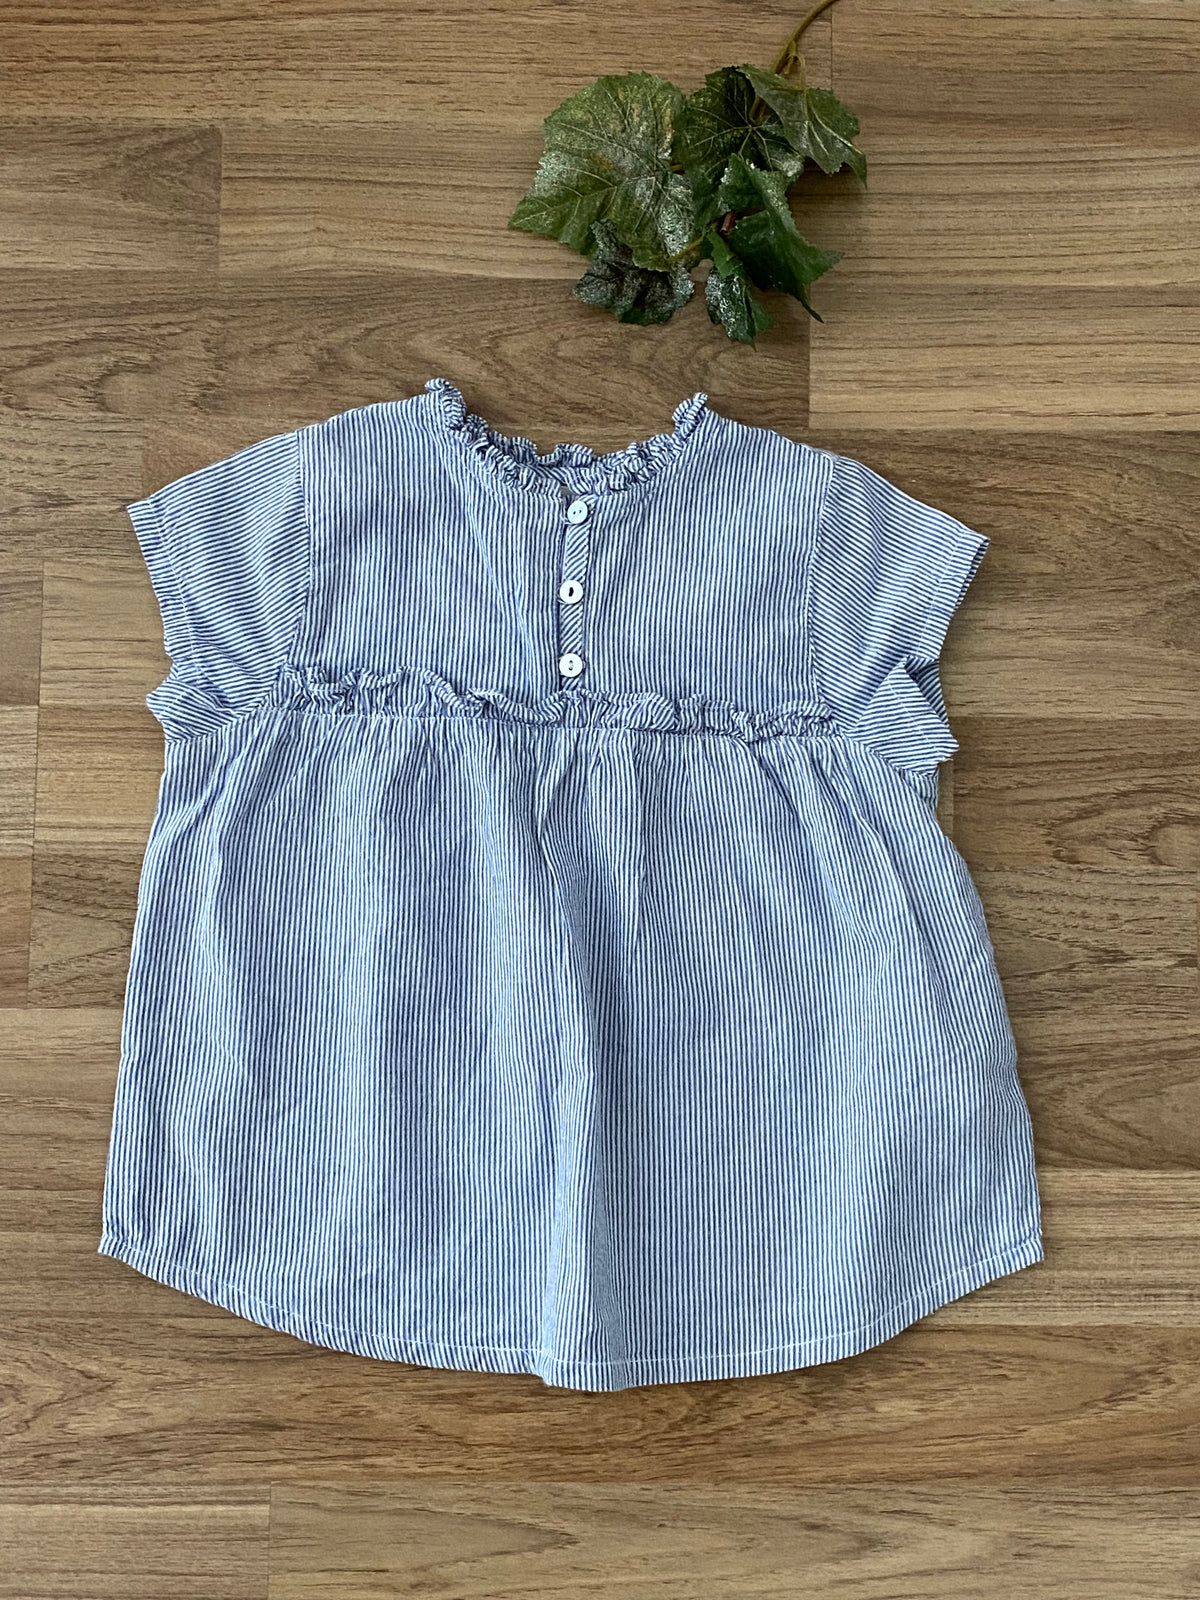 Pullover Blouse (Girls Size 4-5)